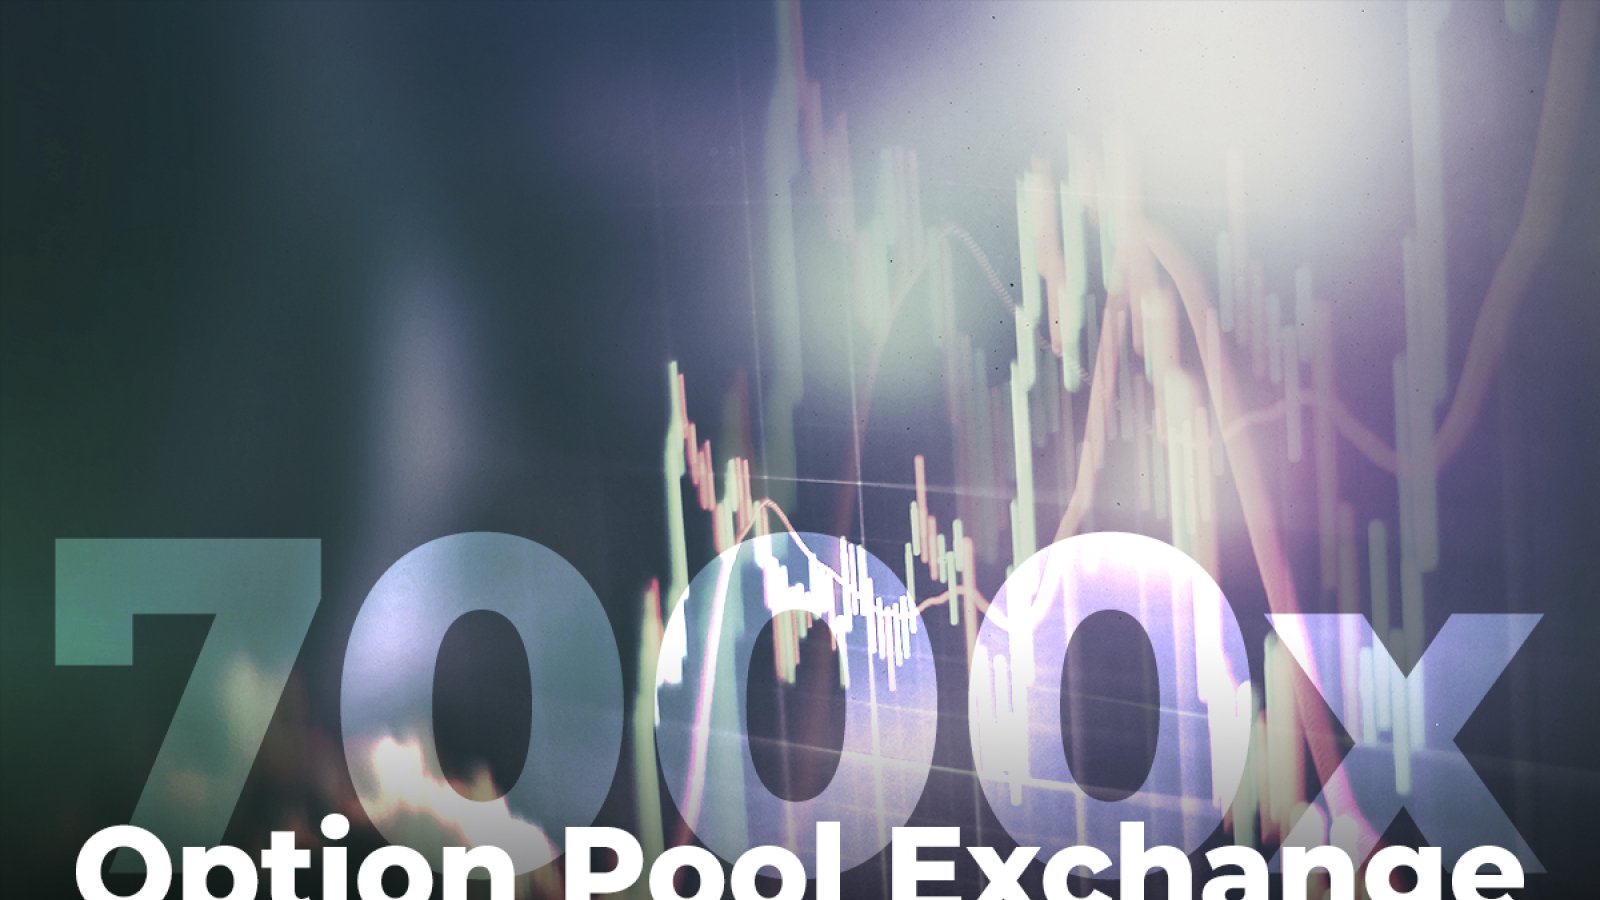 Option Pool Exchange – World’s First Exchange to Offer 7000x Leverage With Our Distinctive Tokenomics